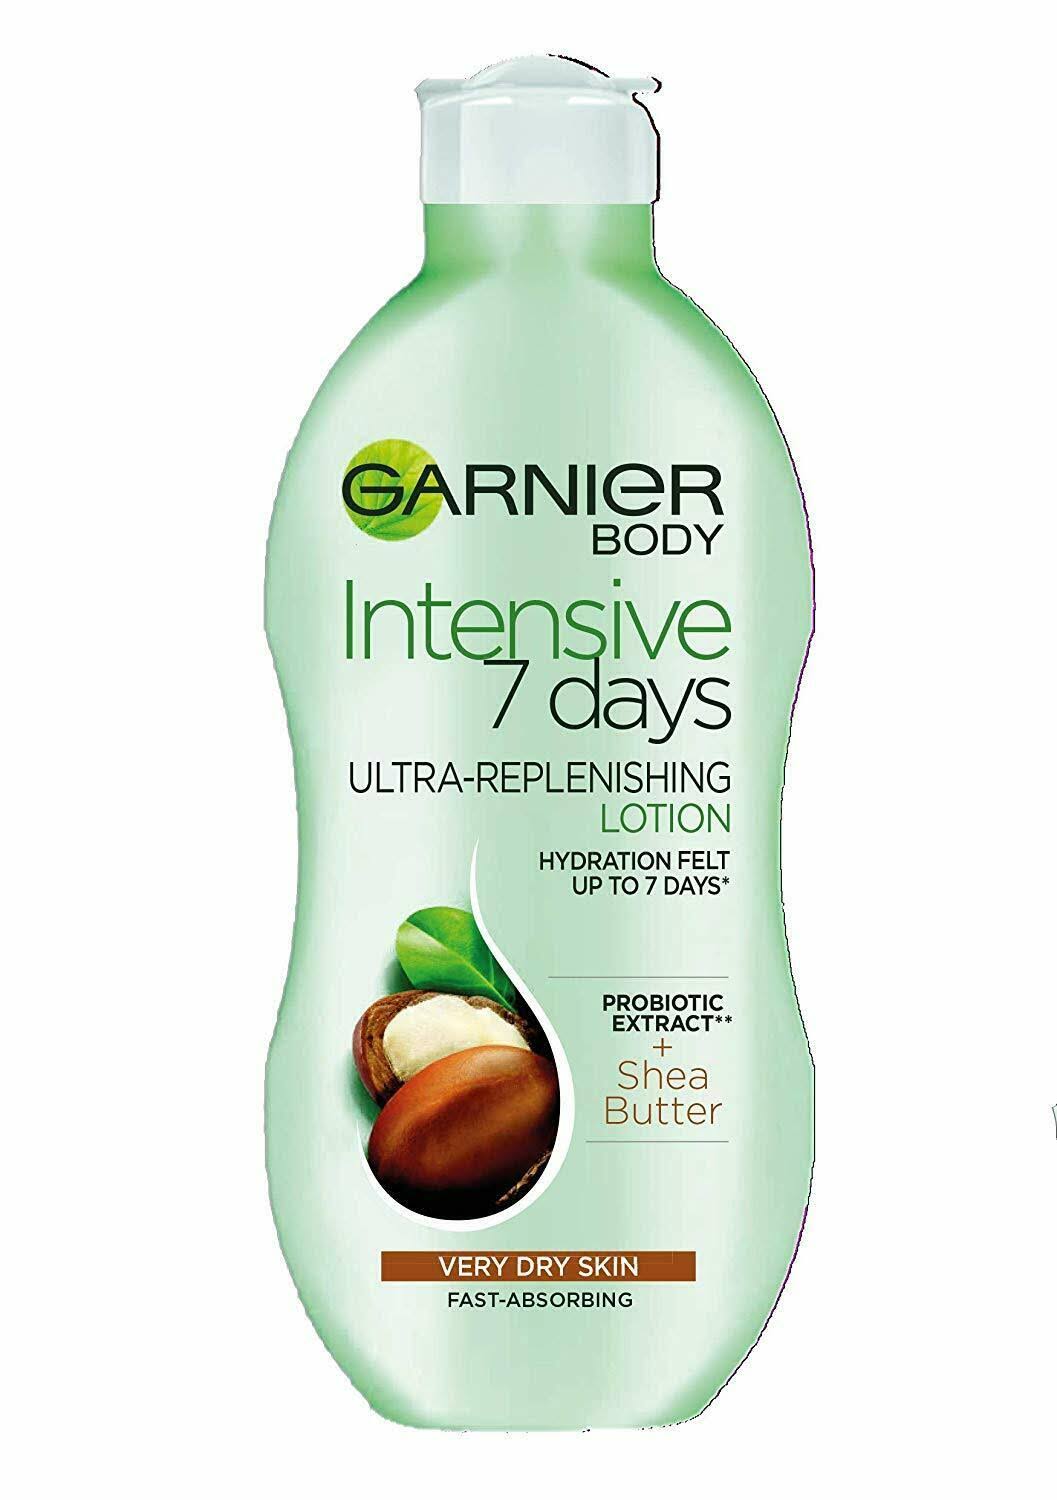 Garnier Intensive 7 Days Shea Butter Probiotic Extract Body Lotion - Dry Skin, 400ml